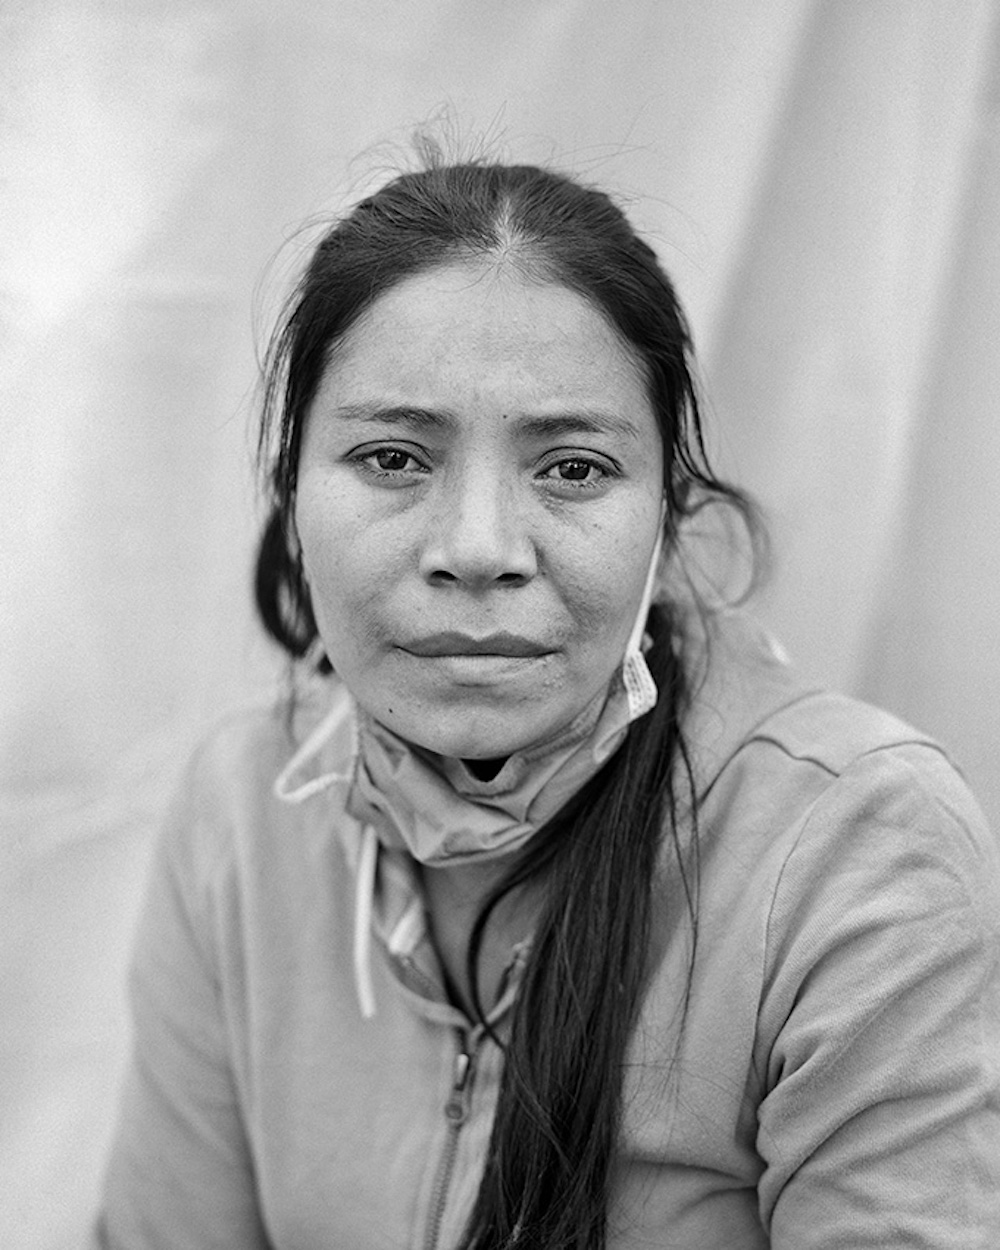 Doris Maria Lara Caballero, age 31, is a migrant from Department Cortés, Honduras. She takes a portrait of herself at the Enrique Romero Municipal Gymnasium in Juárez, Chihuahua, Mexico on 30 April 2021. Series Name: Migrantes. © Adam Ferguson, Australia, Photographer of the Year, Professional, Portraiture, 2022 Sony World Photography Awards exhibition